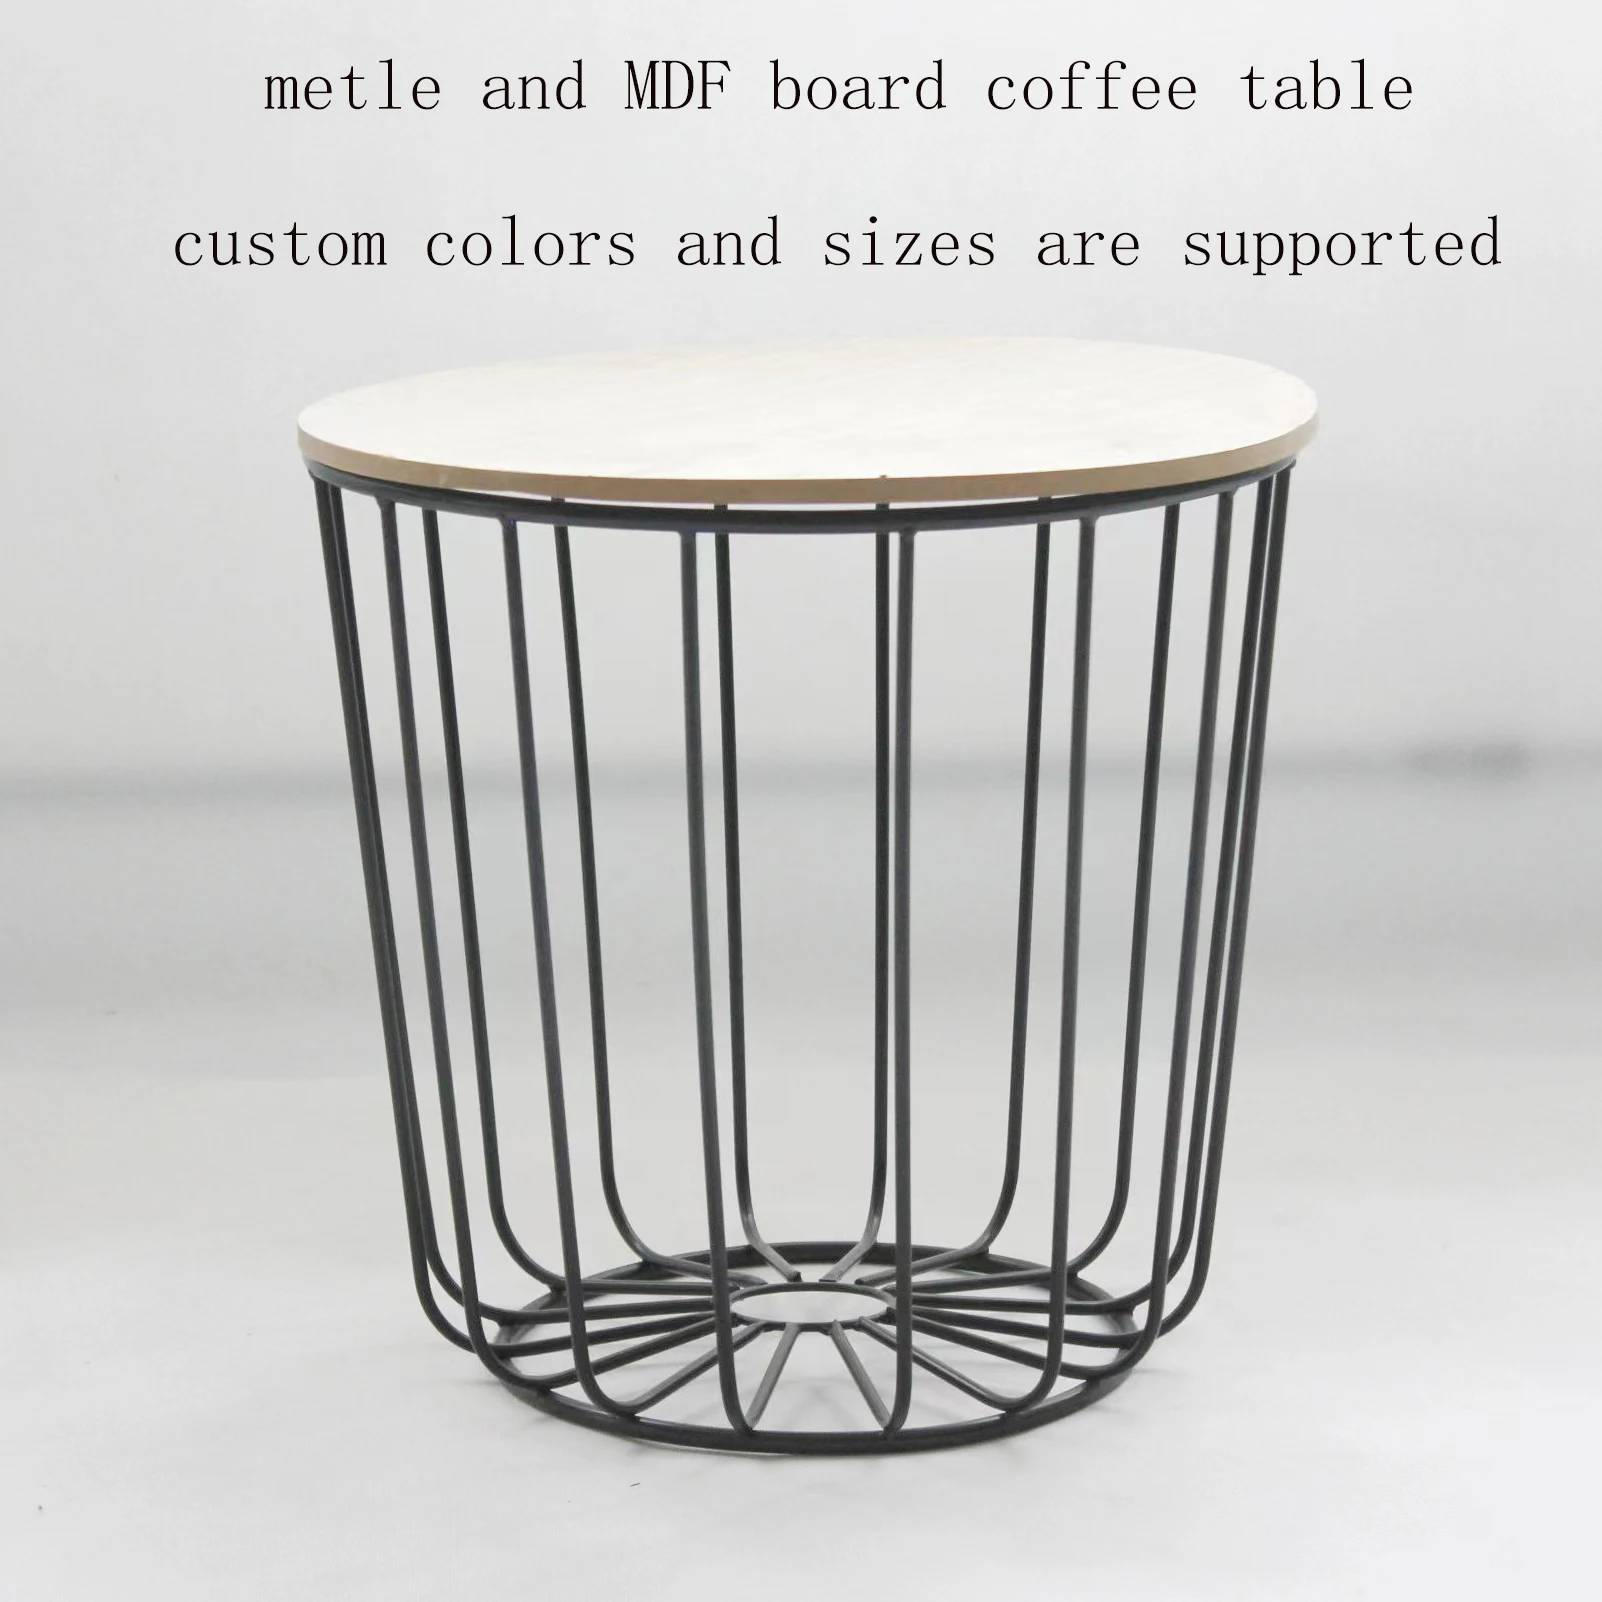 Fashionable hot metal and MDF board  coffee table for home or hotel custom colors and sizes